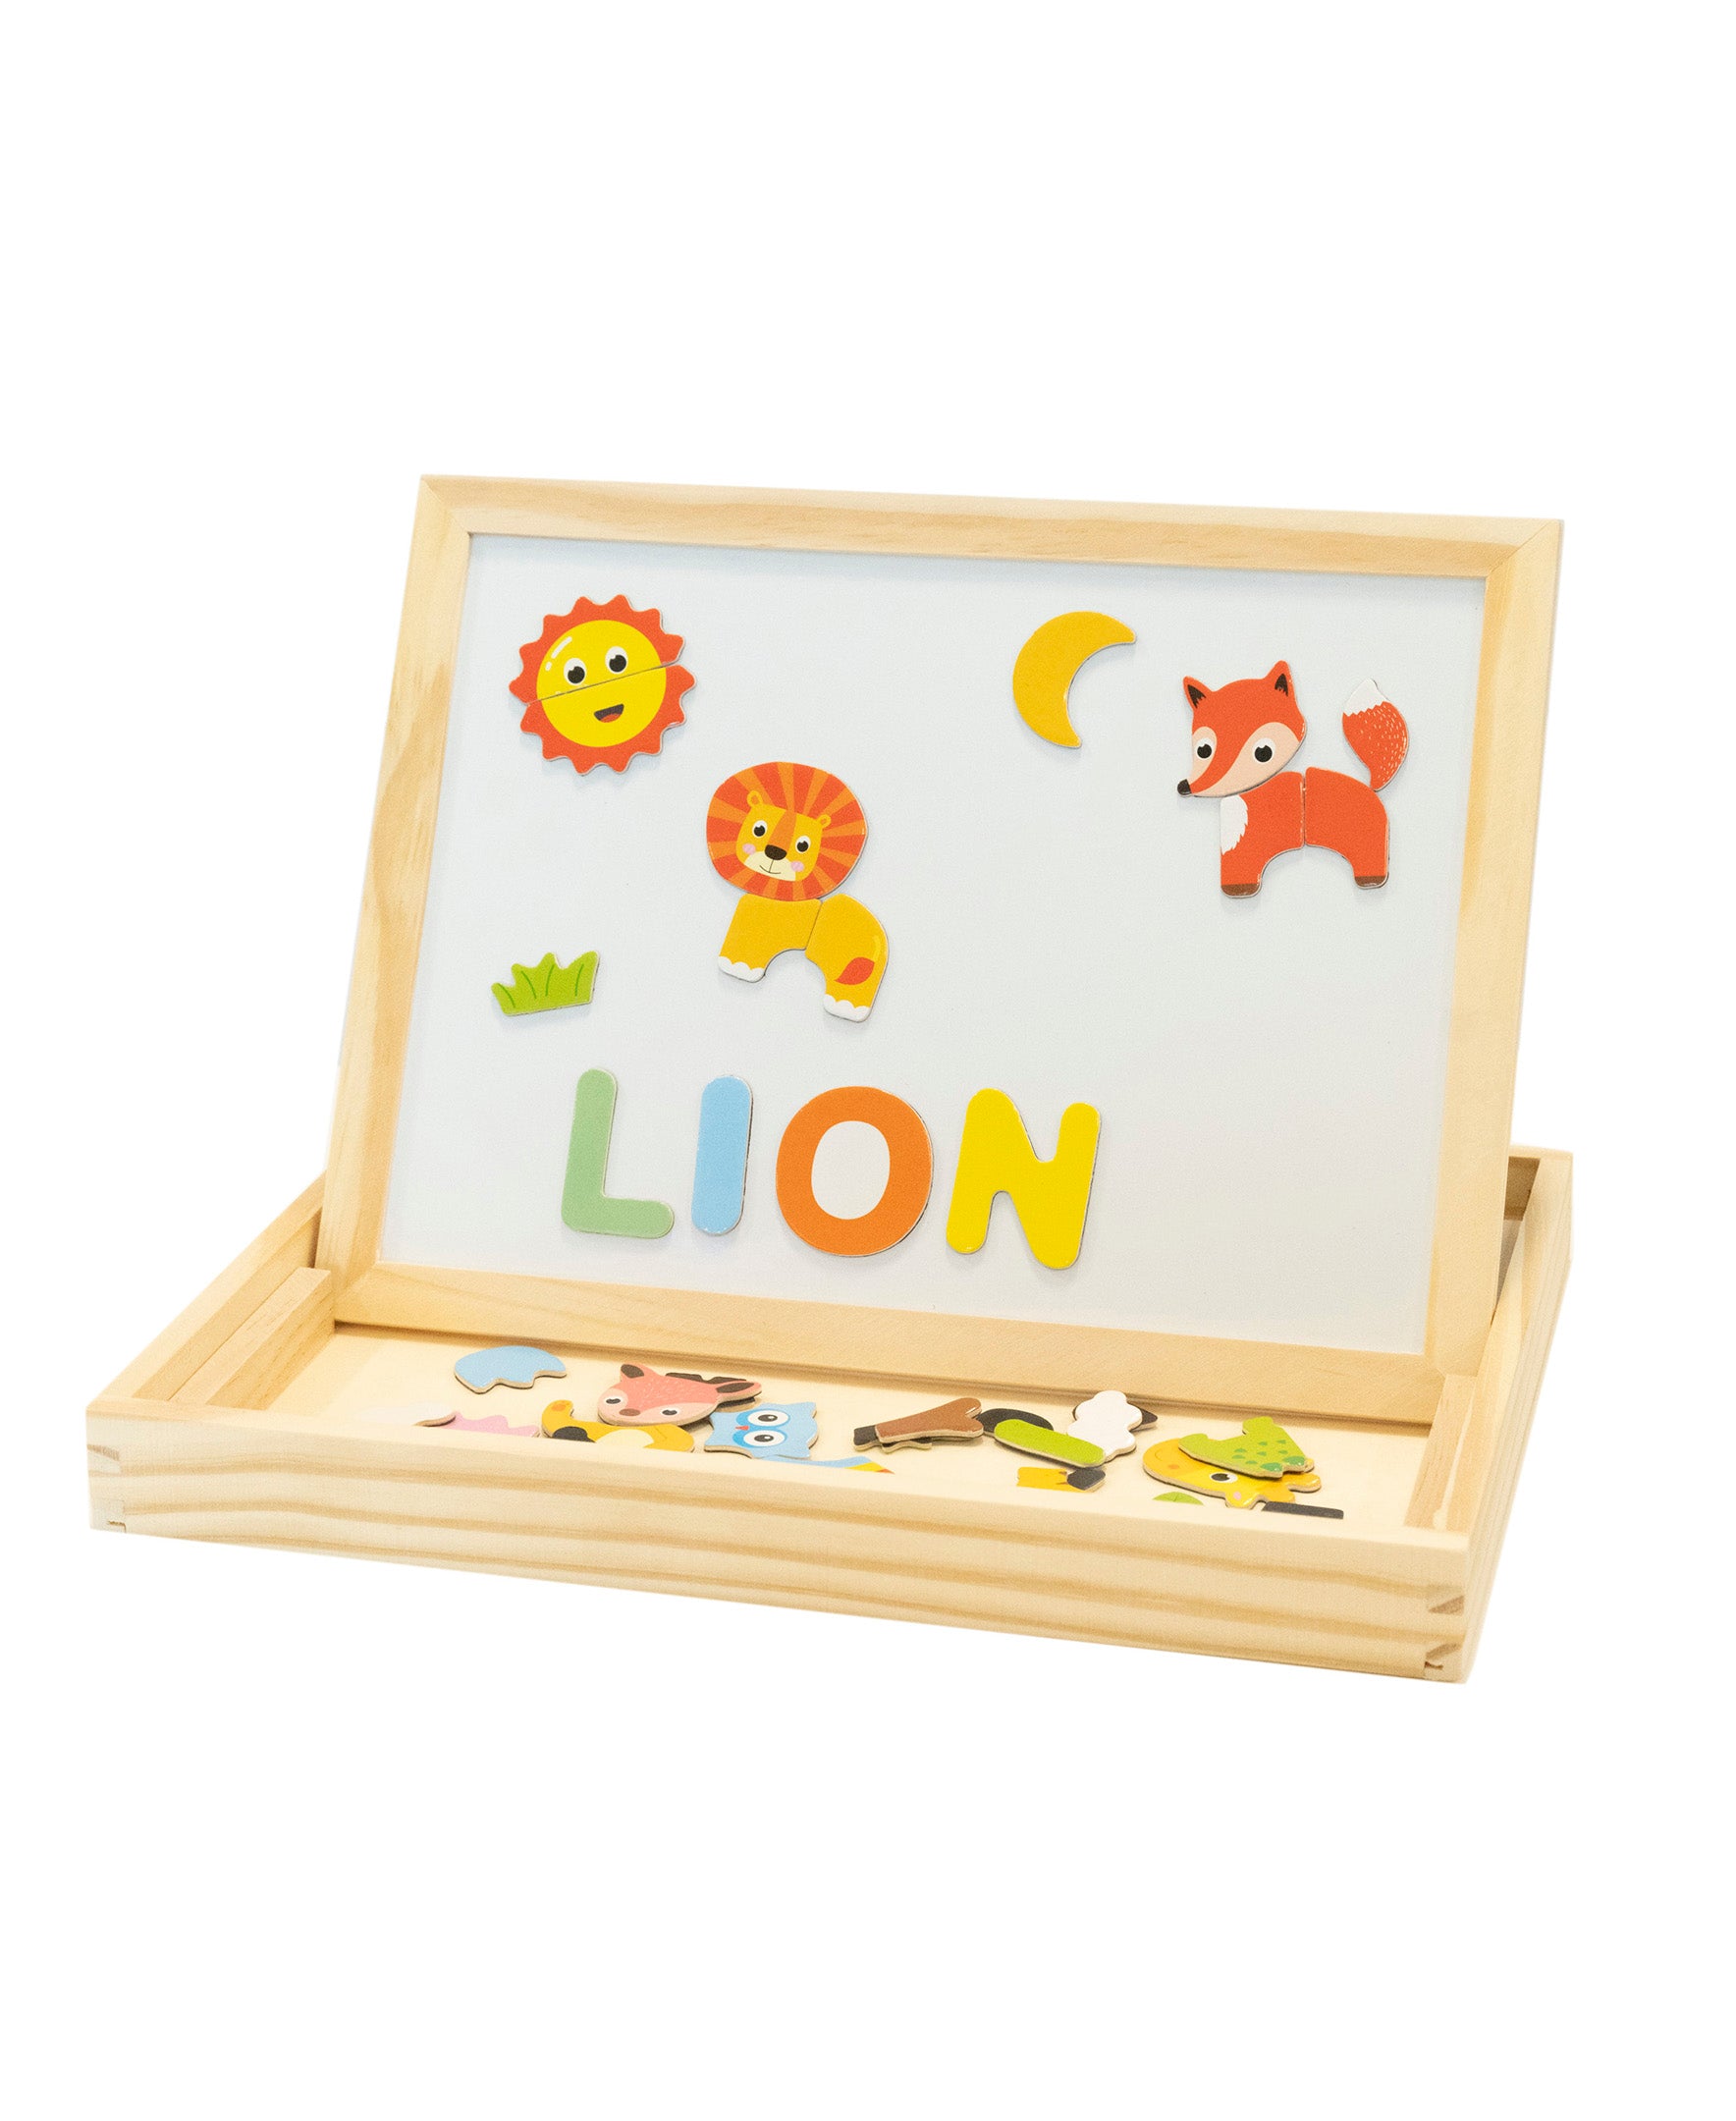 Ealing Baby Art Easel - Wood Frame with Paper Roll - Natural Wood Color